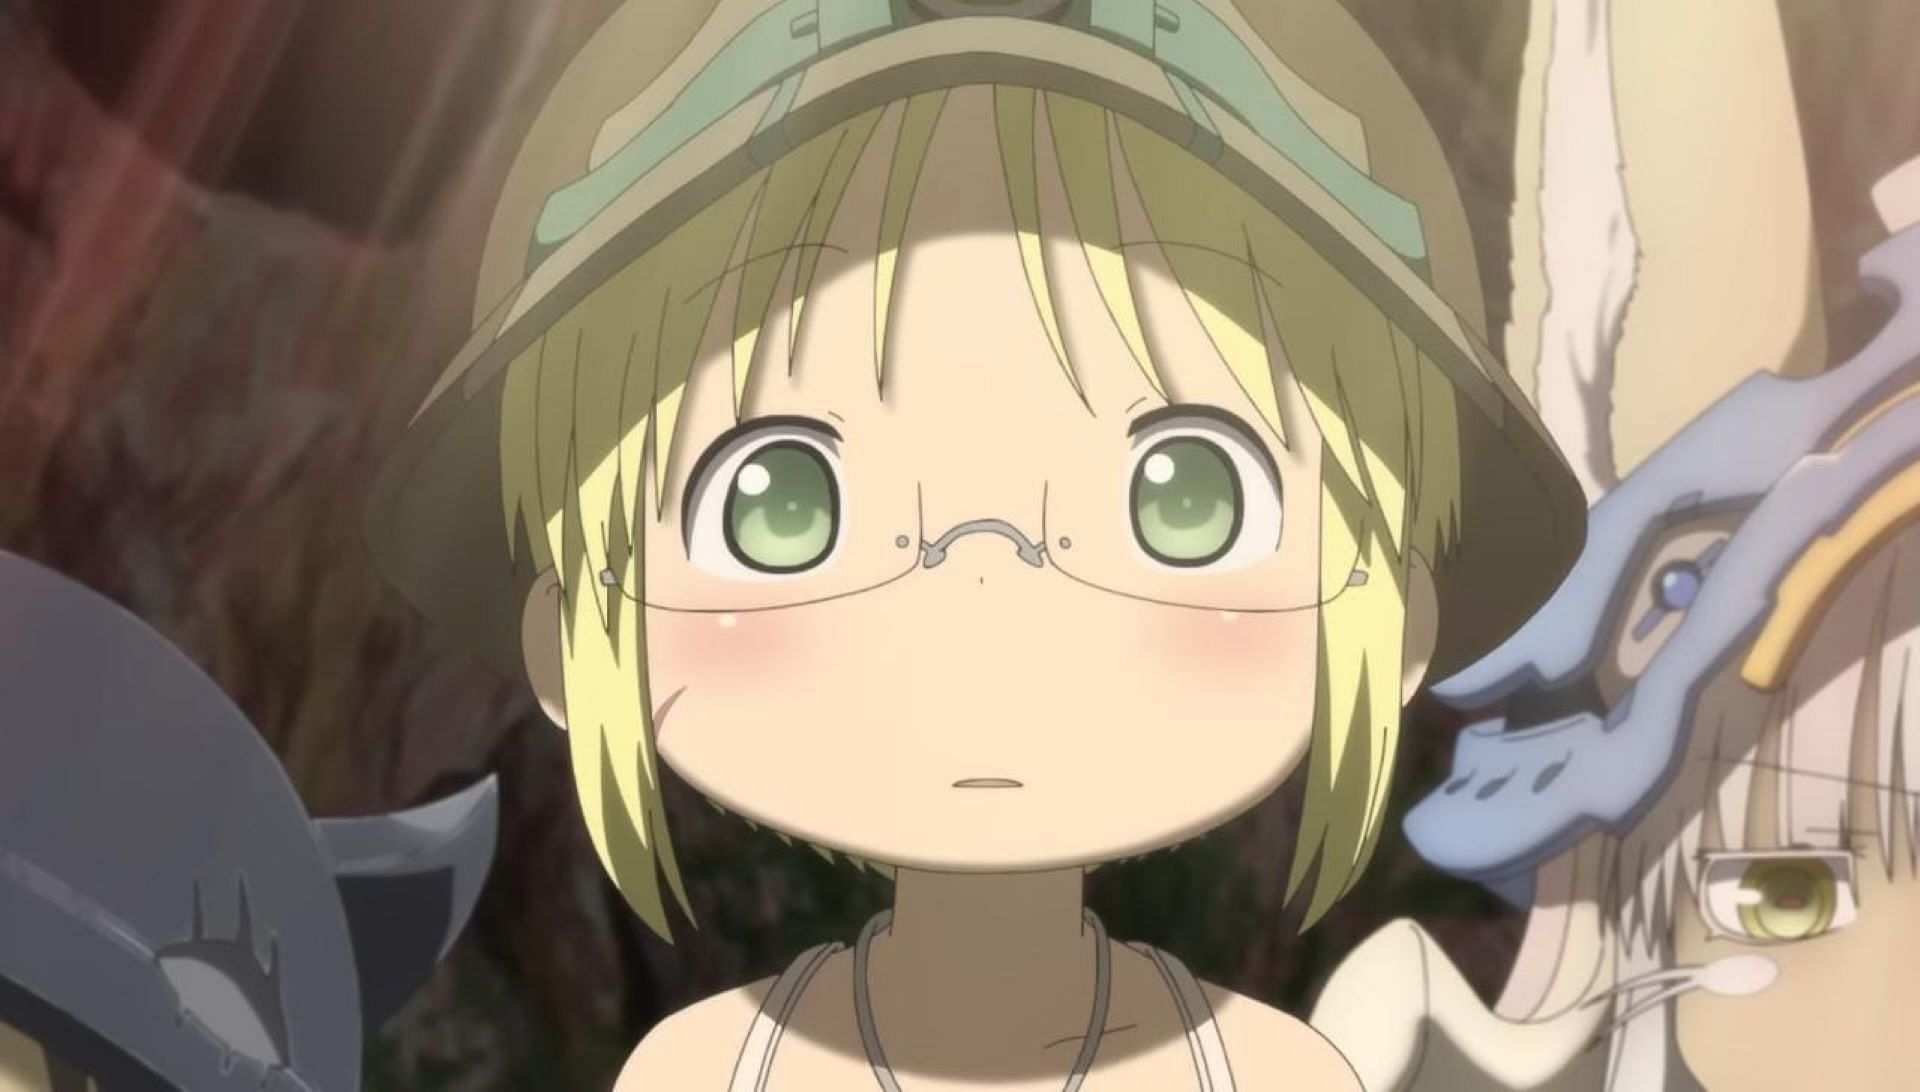 Riko as seen in Made in Abyss season 3 announcement PV (Image Kinema Citrus)